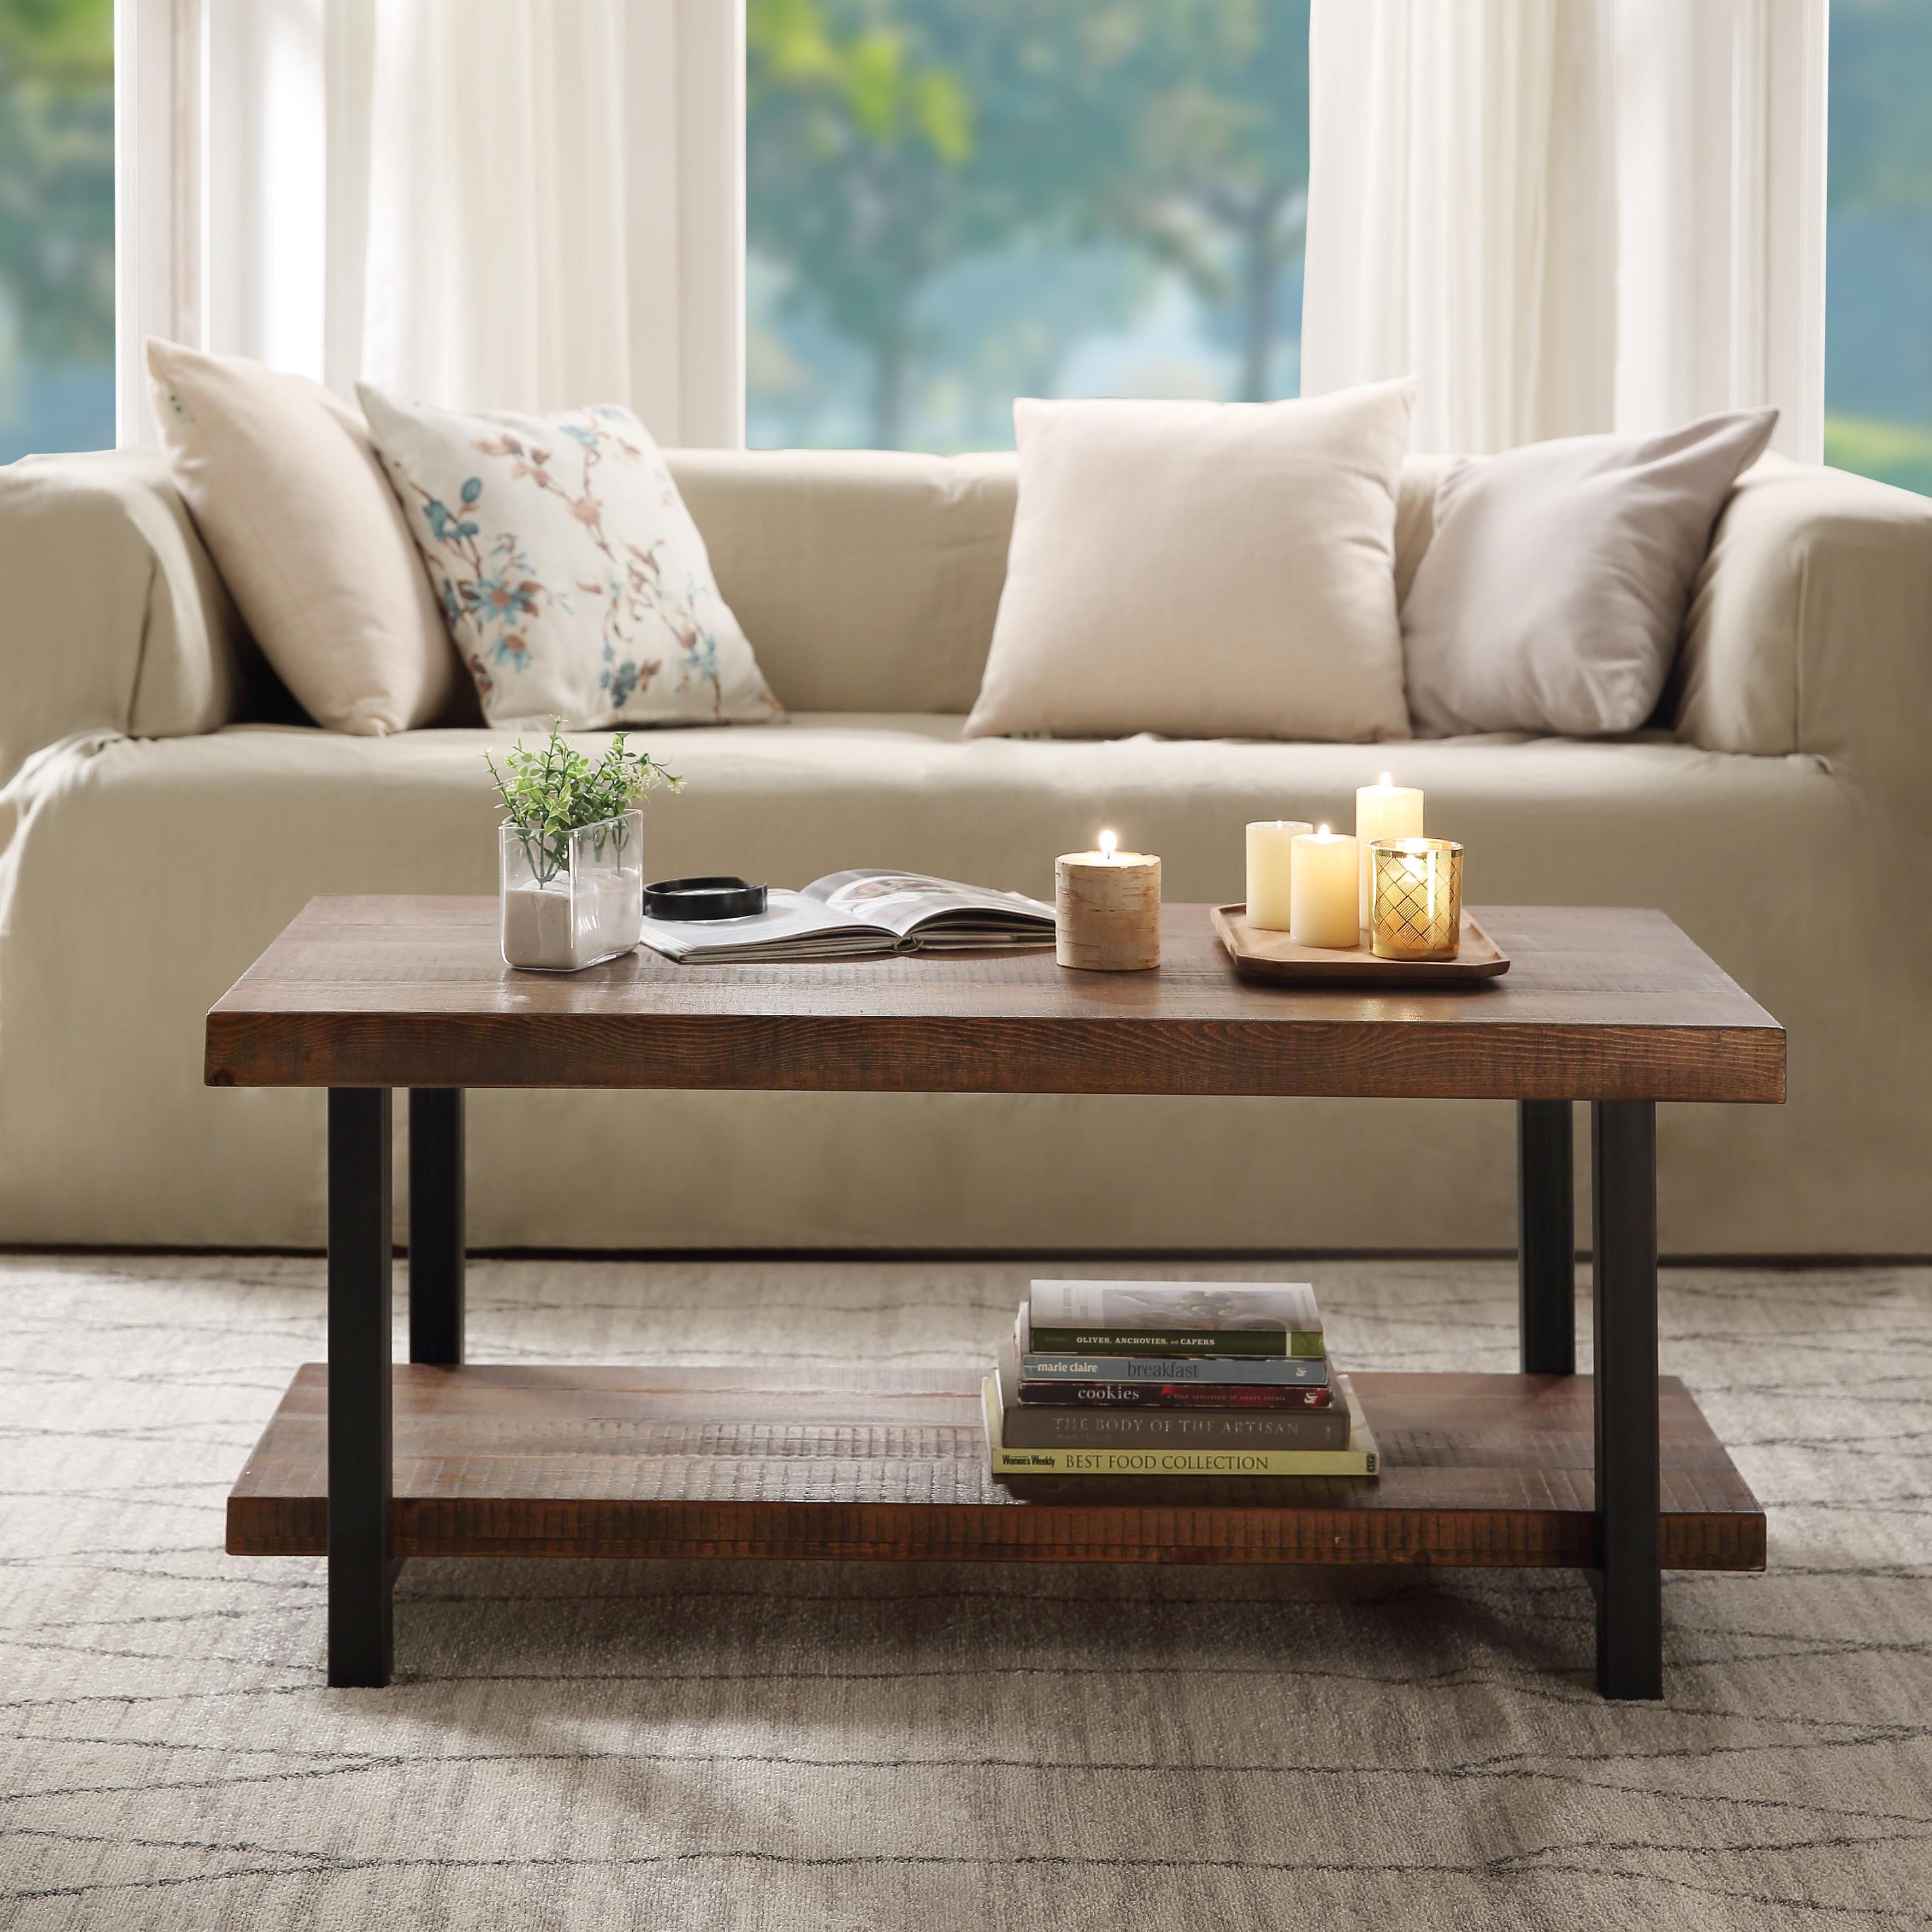 Coffee Tables for Living Room, Industrial Coffee Table with Storage